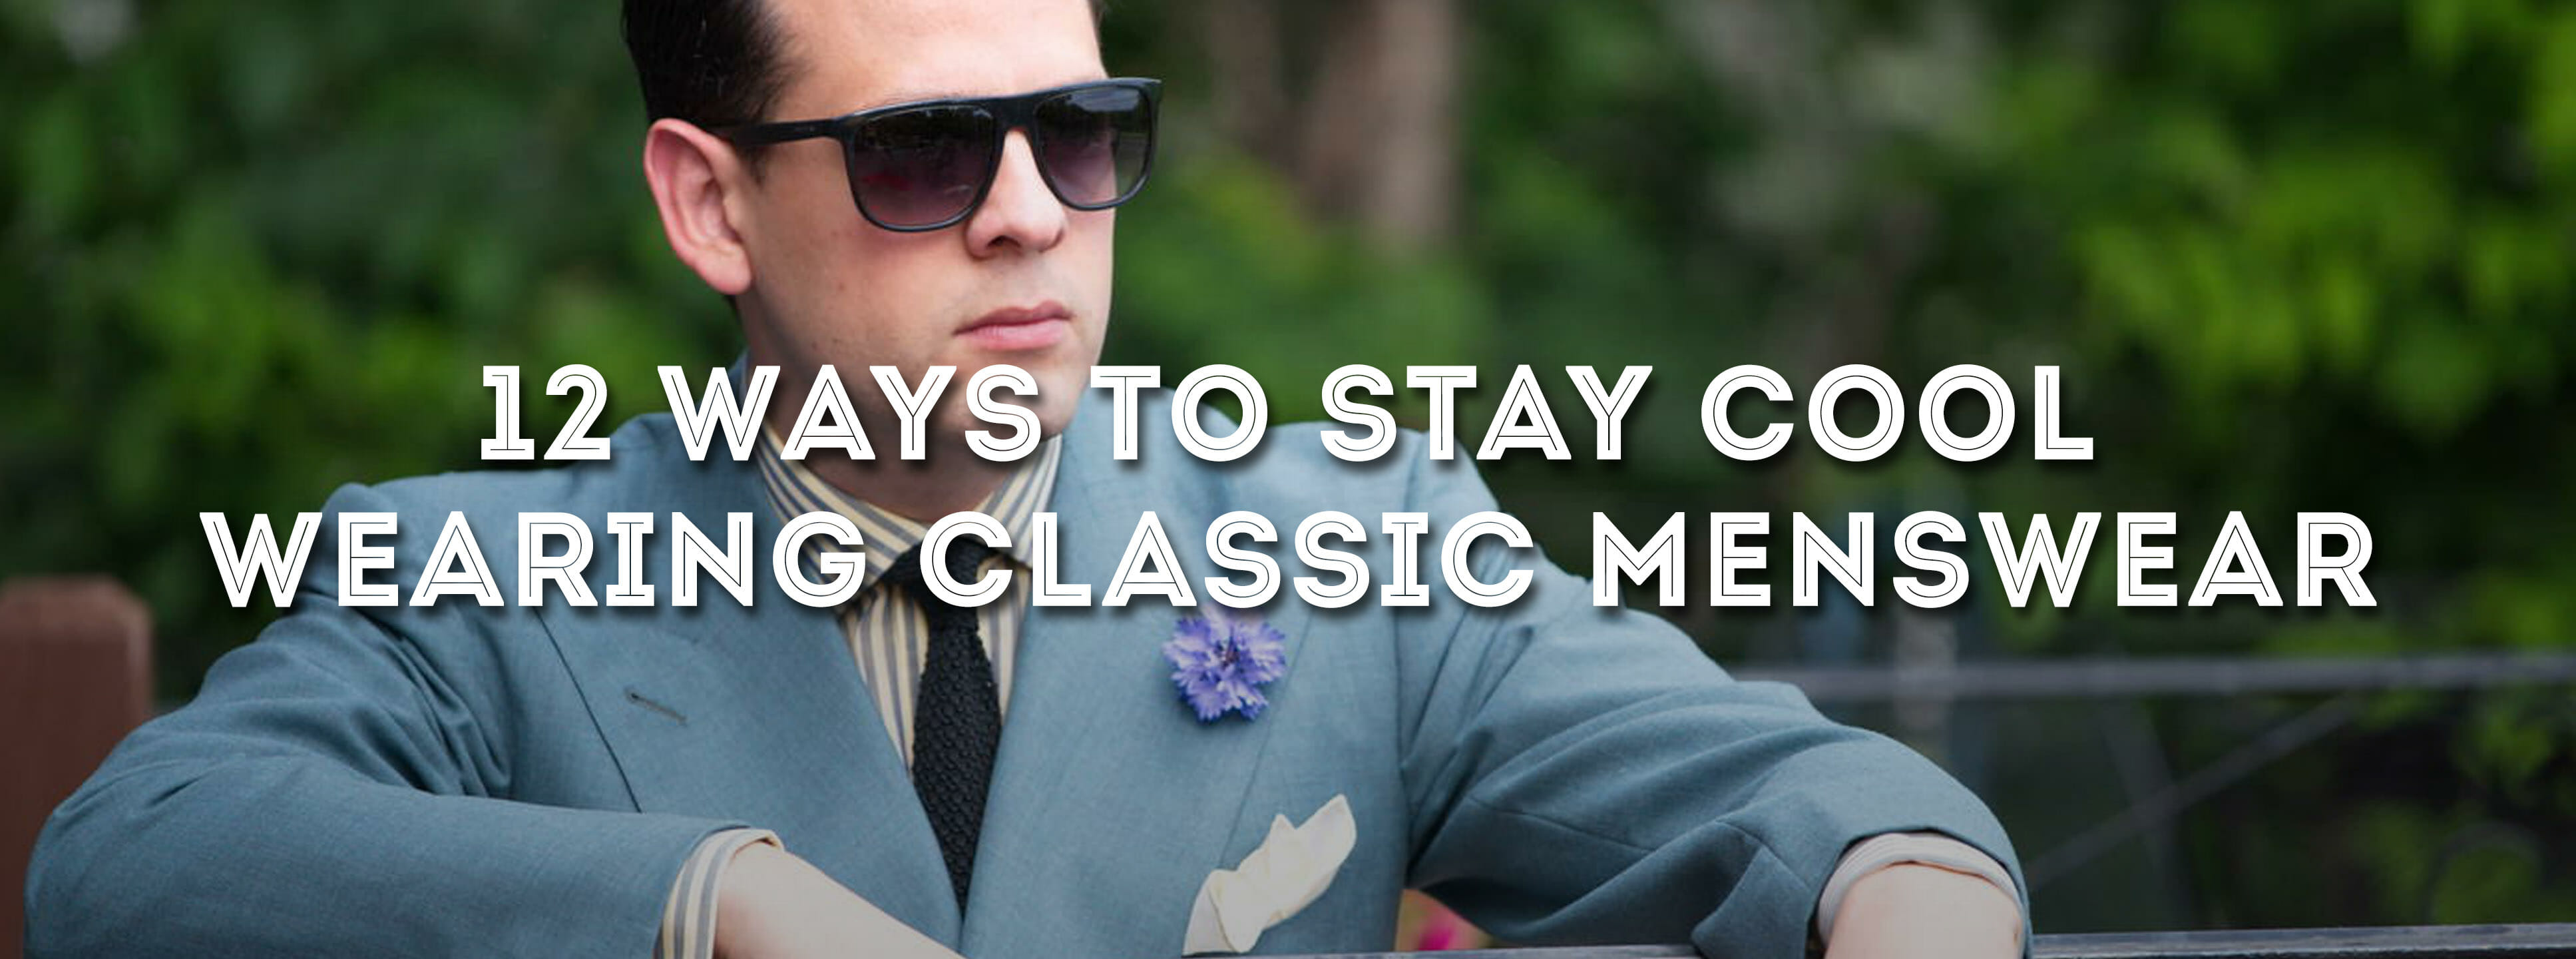 12 ways to stay cool wearing classic menswear